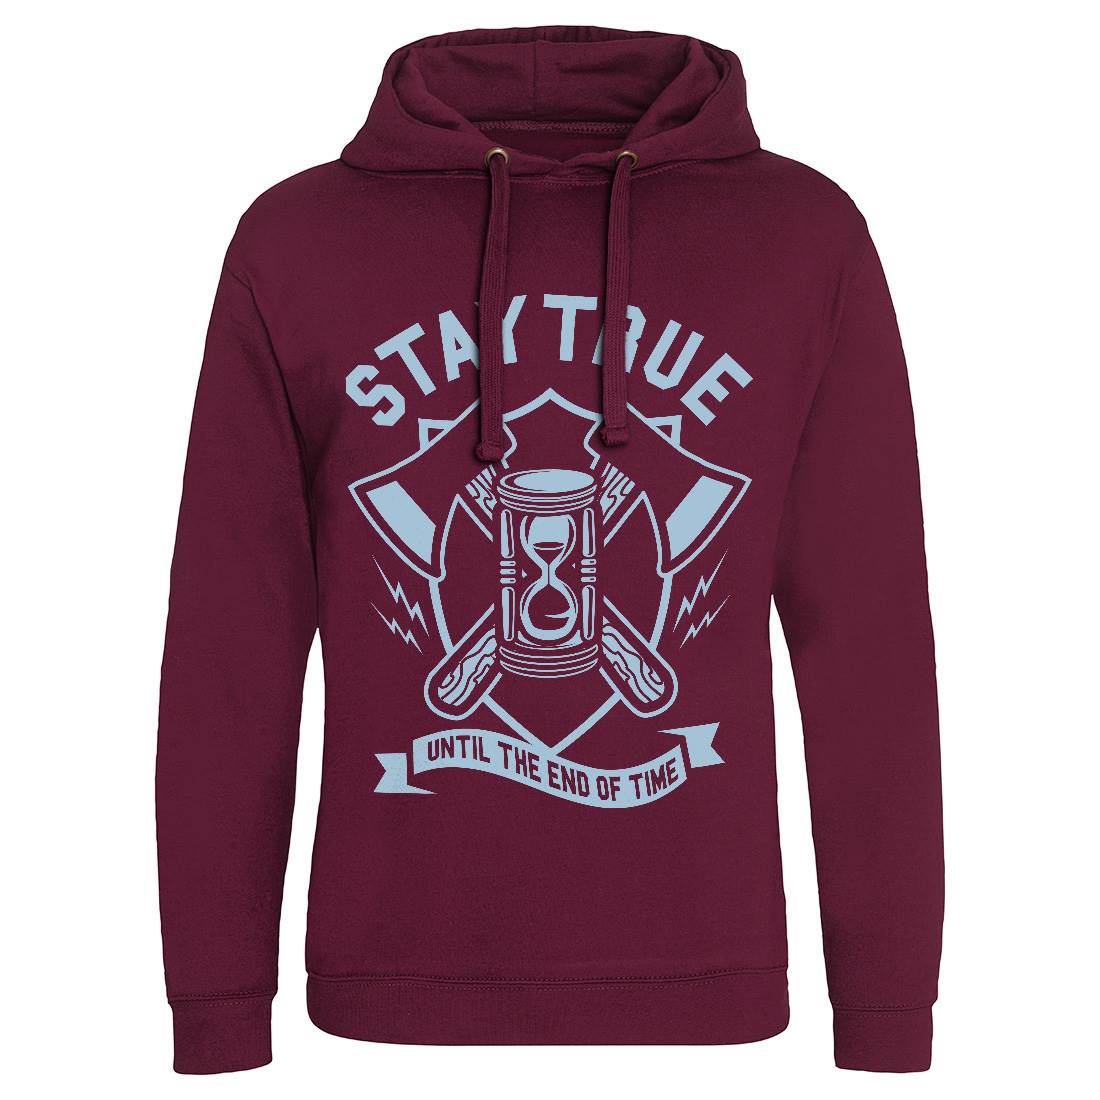 Stay True Mens Hoodie Without Pocket Quotes A285